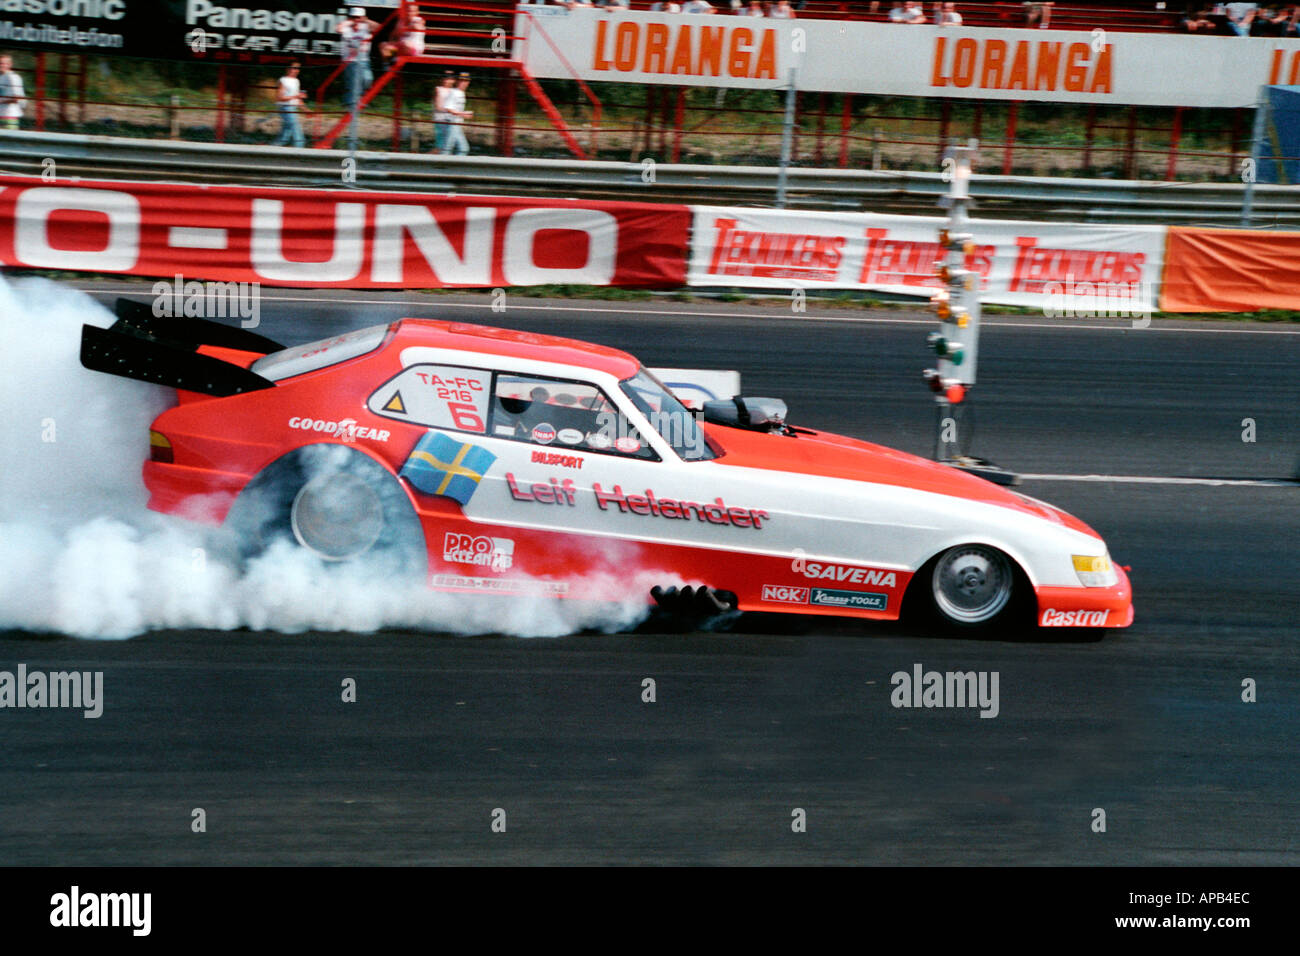 Leif Helanders saab bodied alcohol funny car burnout at mantrop park in sweden methanol Stock Photo